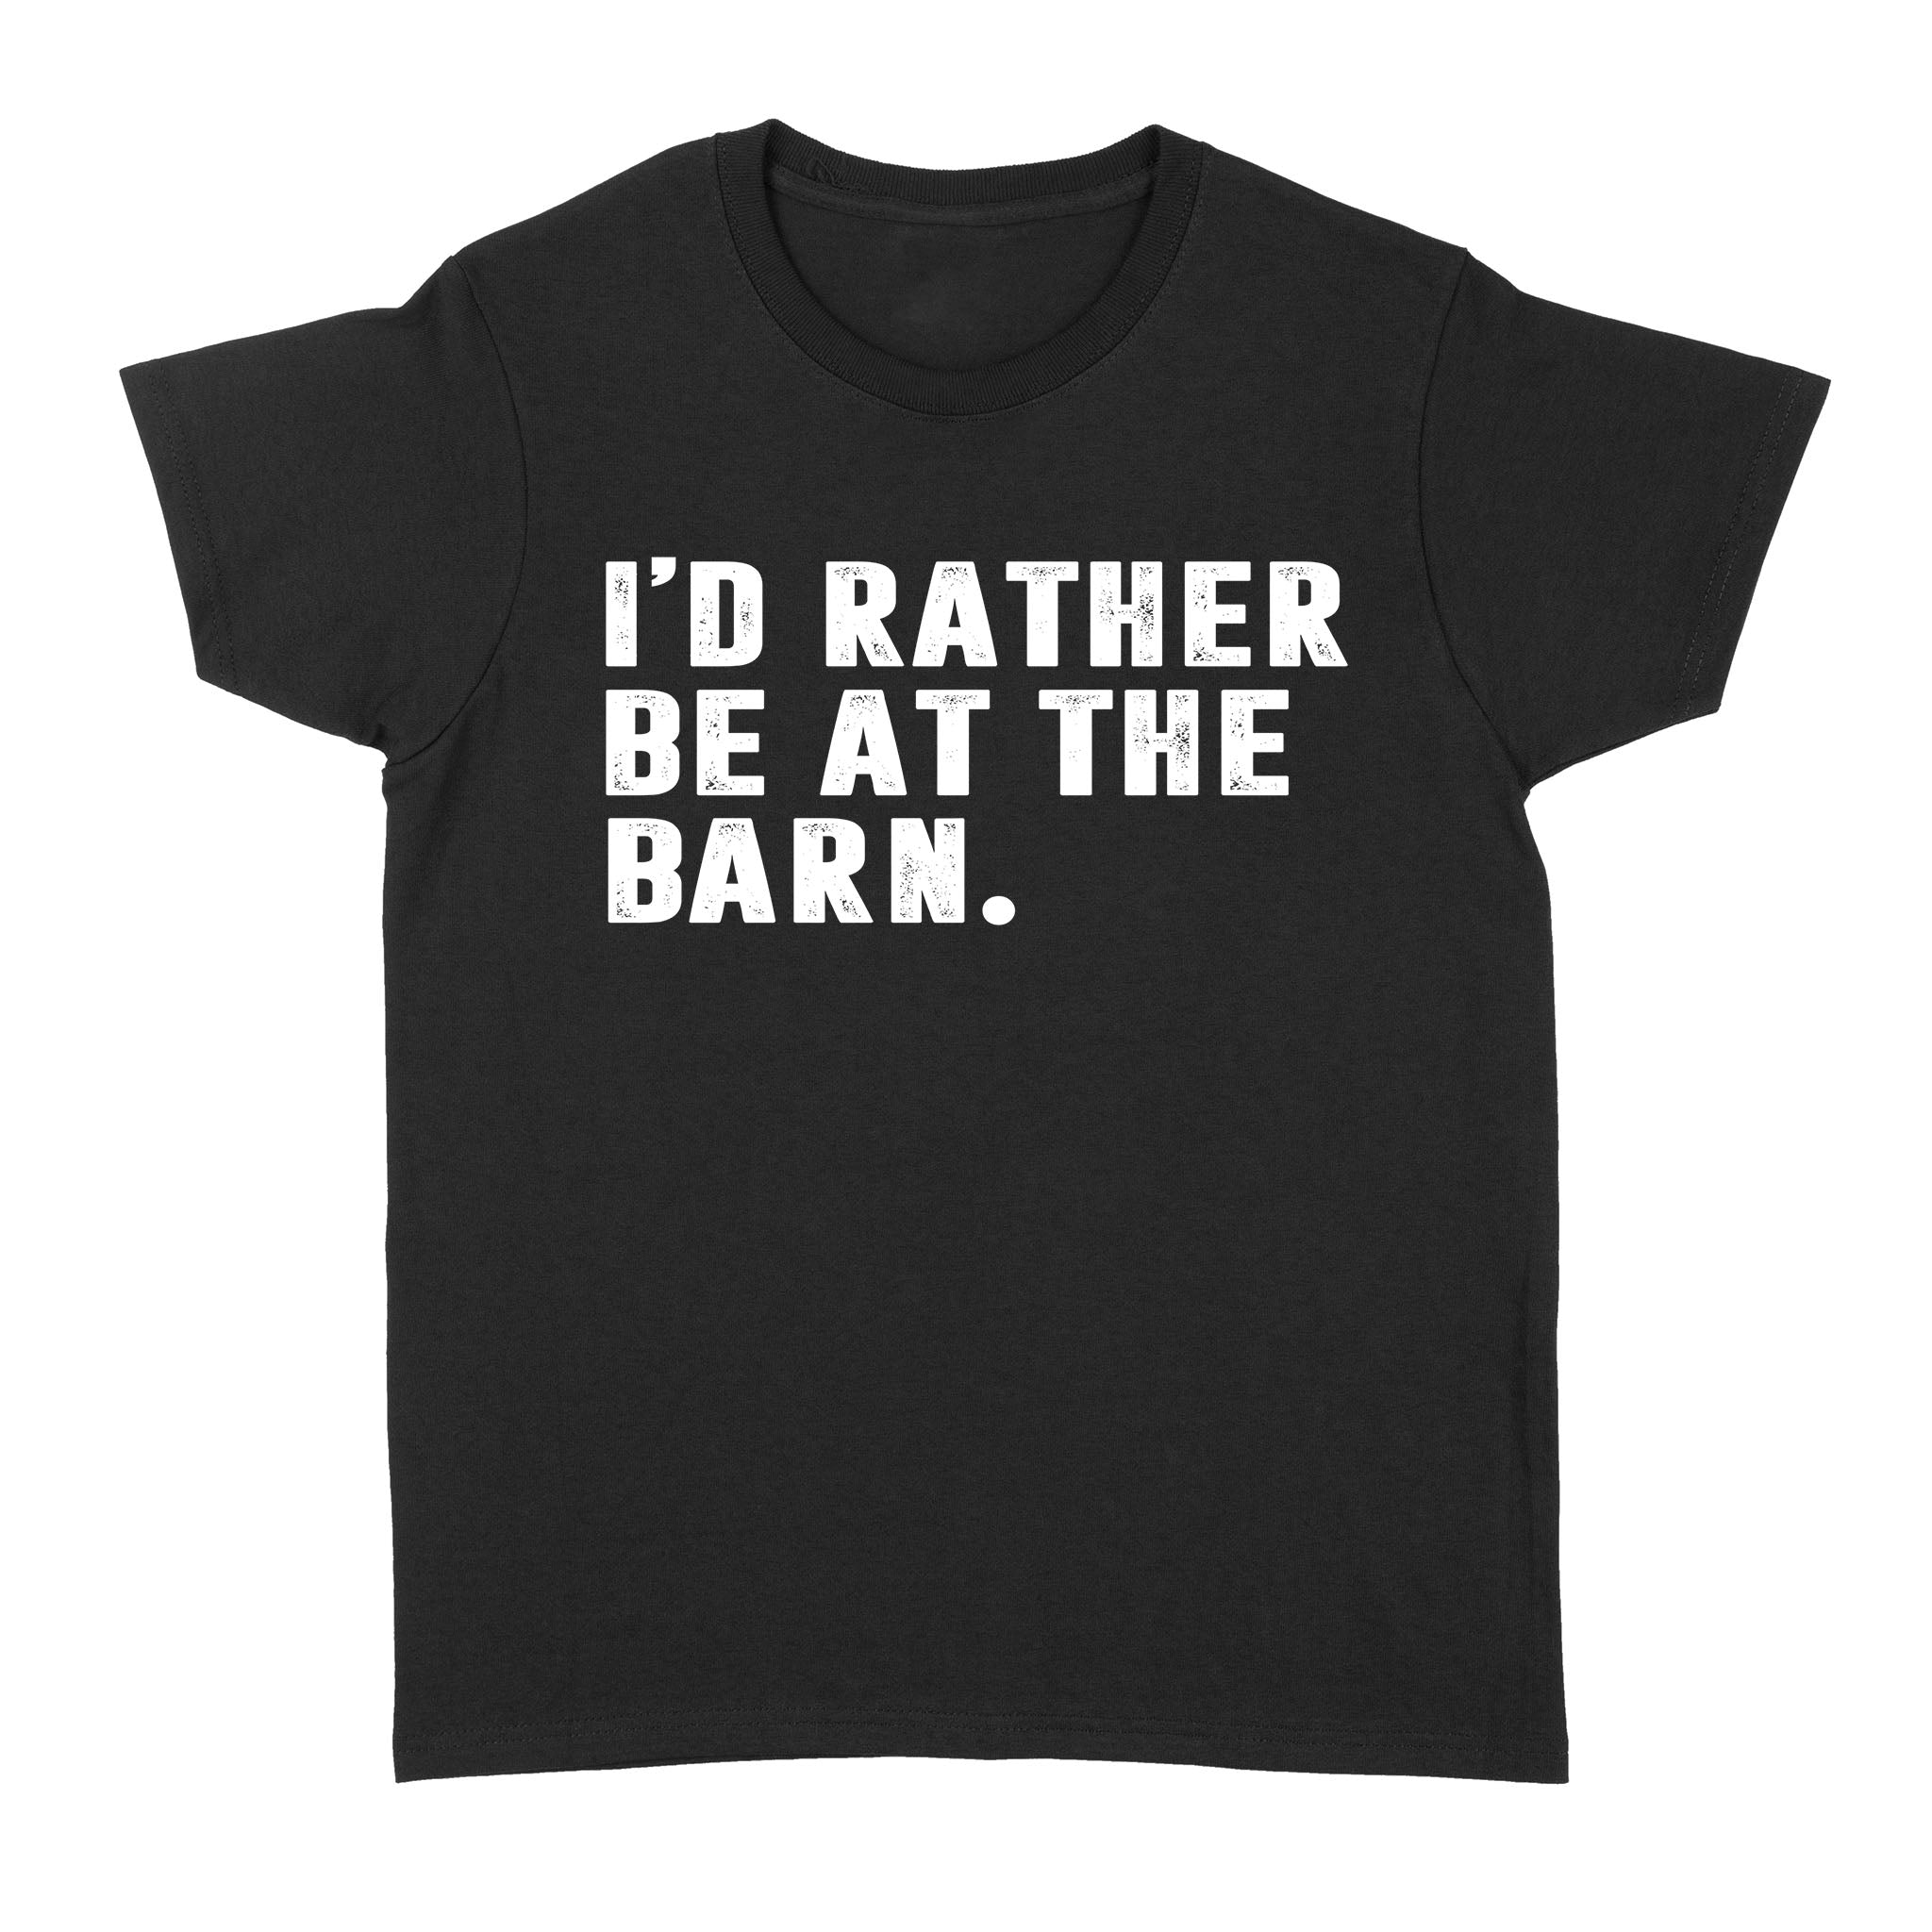 I'd Rather Be At The Barn, Country Girl Shirt, Gift For Horse Owner, Horse Trainer, Country Farm Girl Shirt D02 NQS2803 - Standard Women's T-shirt